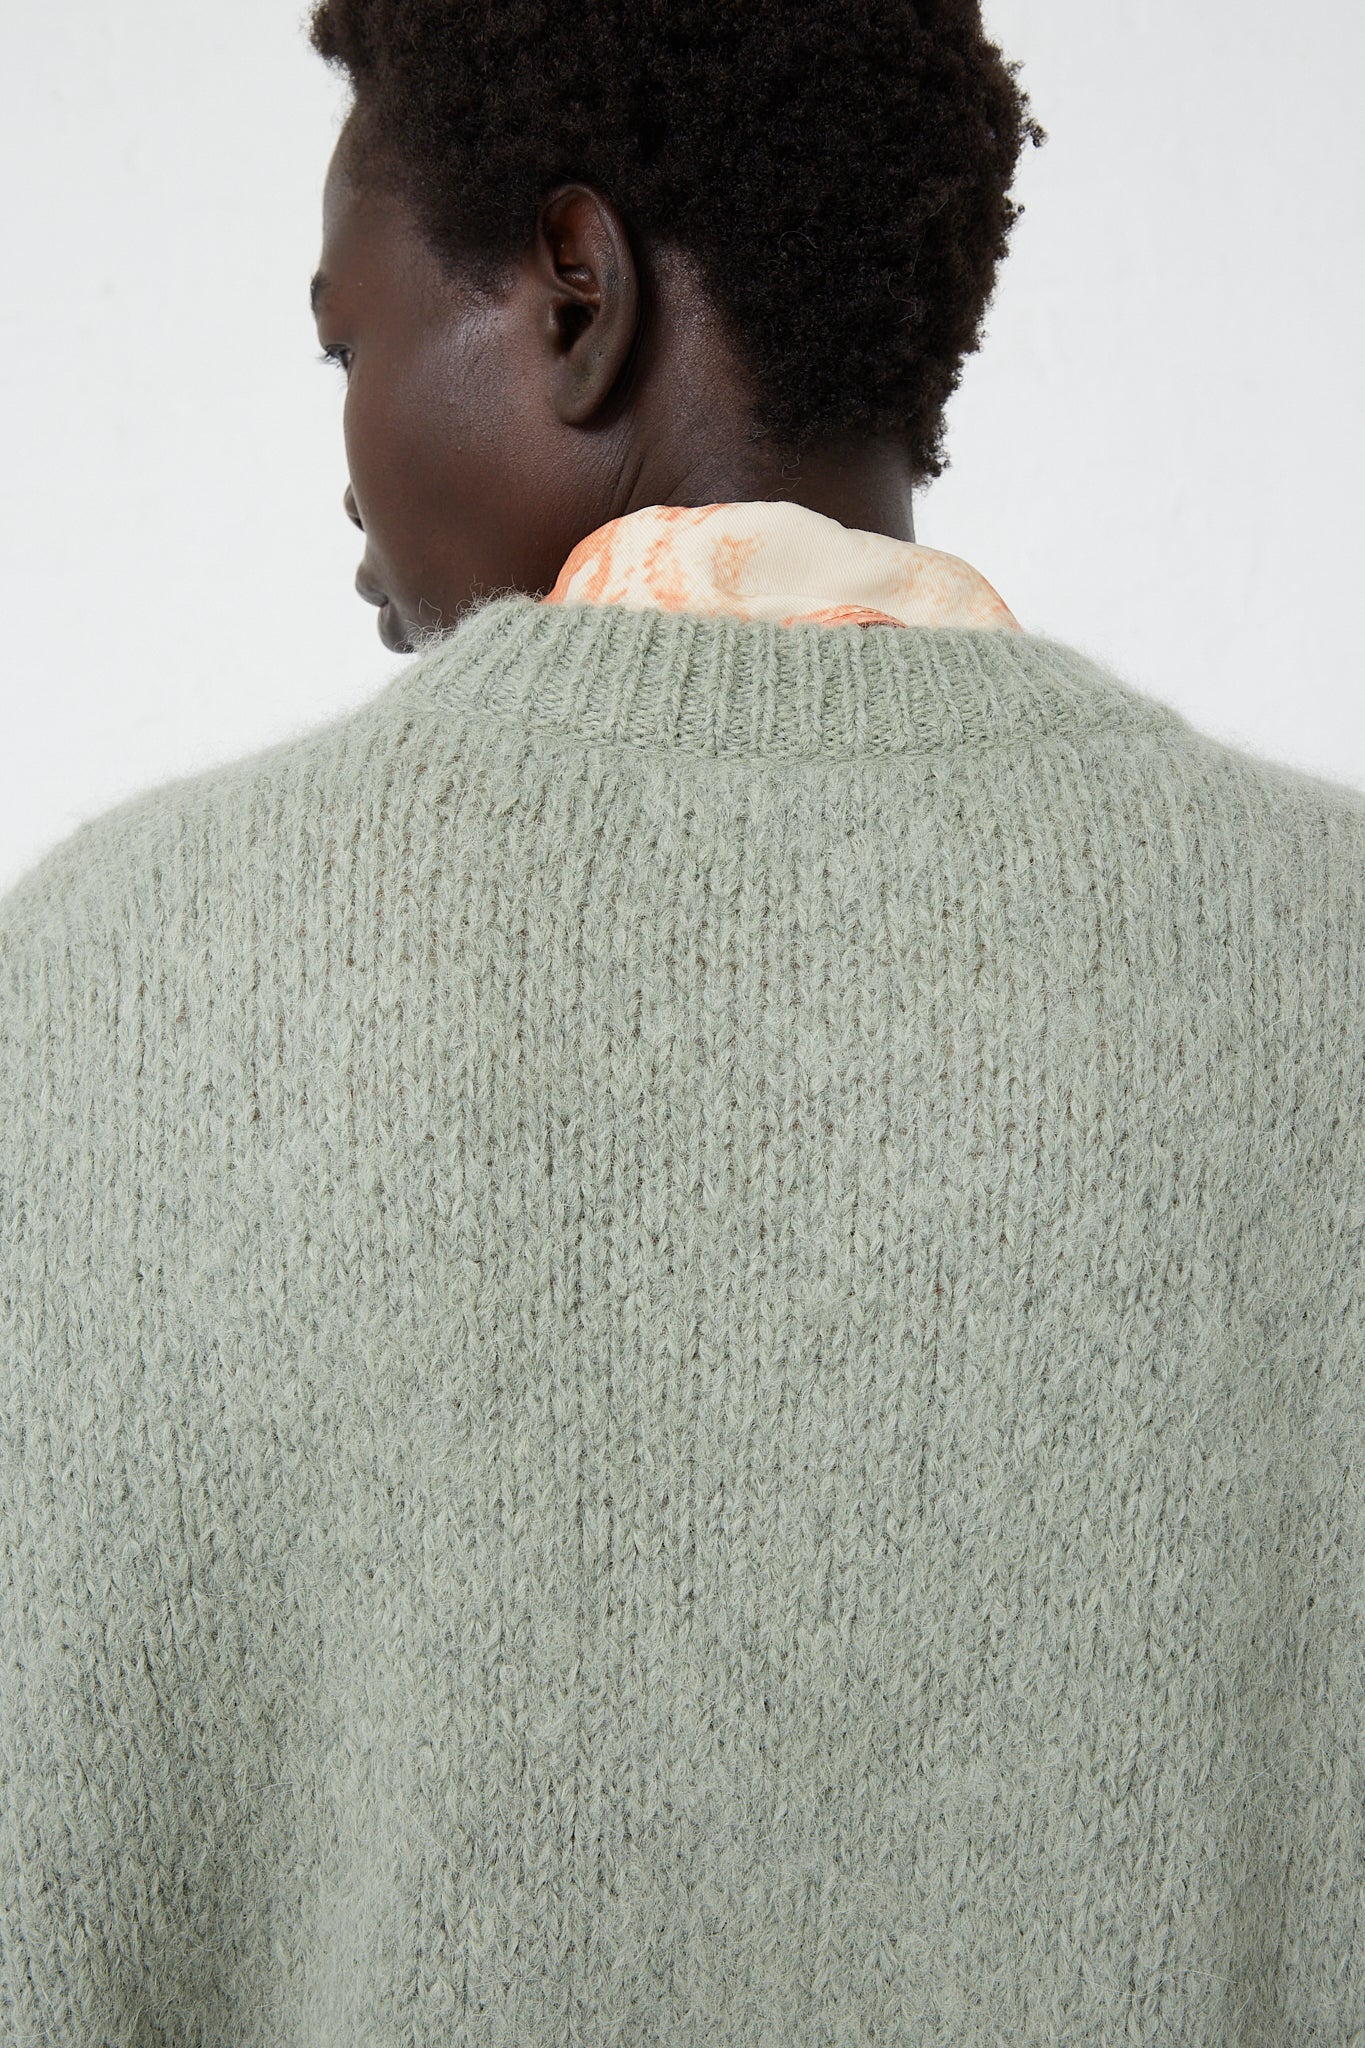 The back view of a woman wearing a green Rejina Pyo Alpaca Blend Toni Sweater in Mint with crew neck and logo detail.